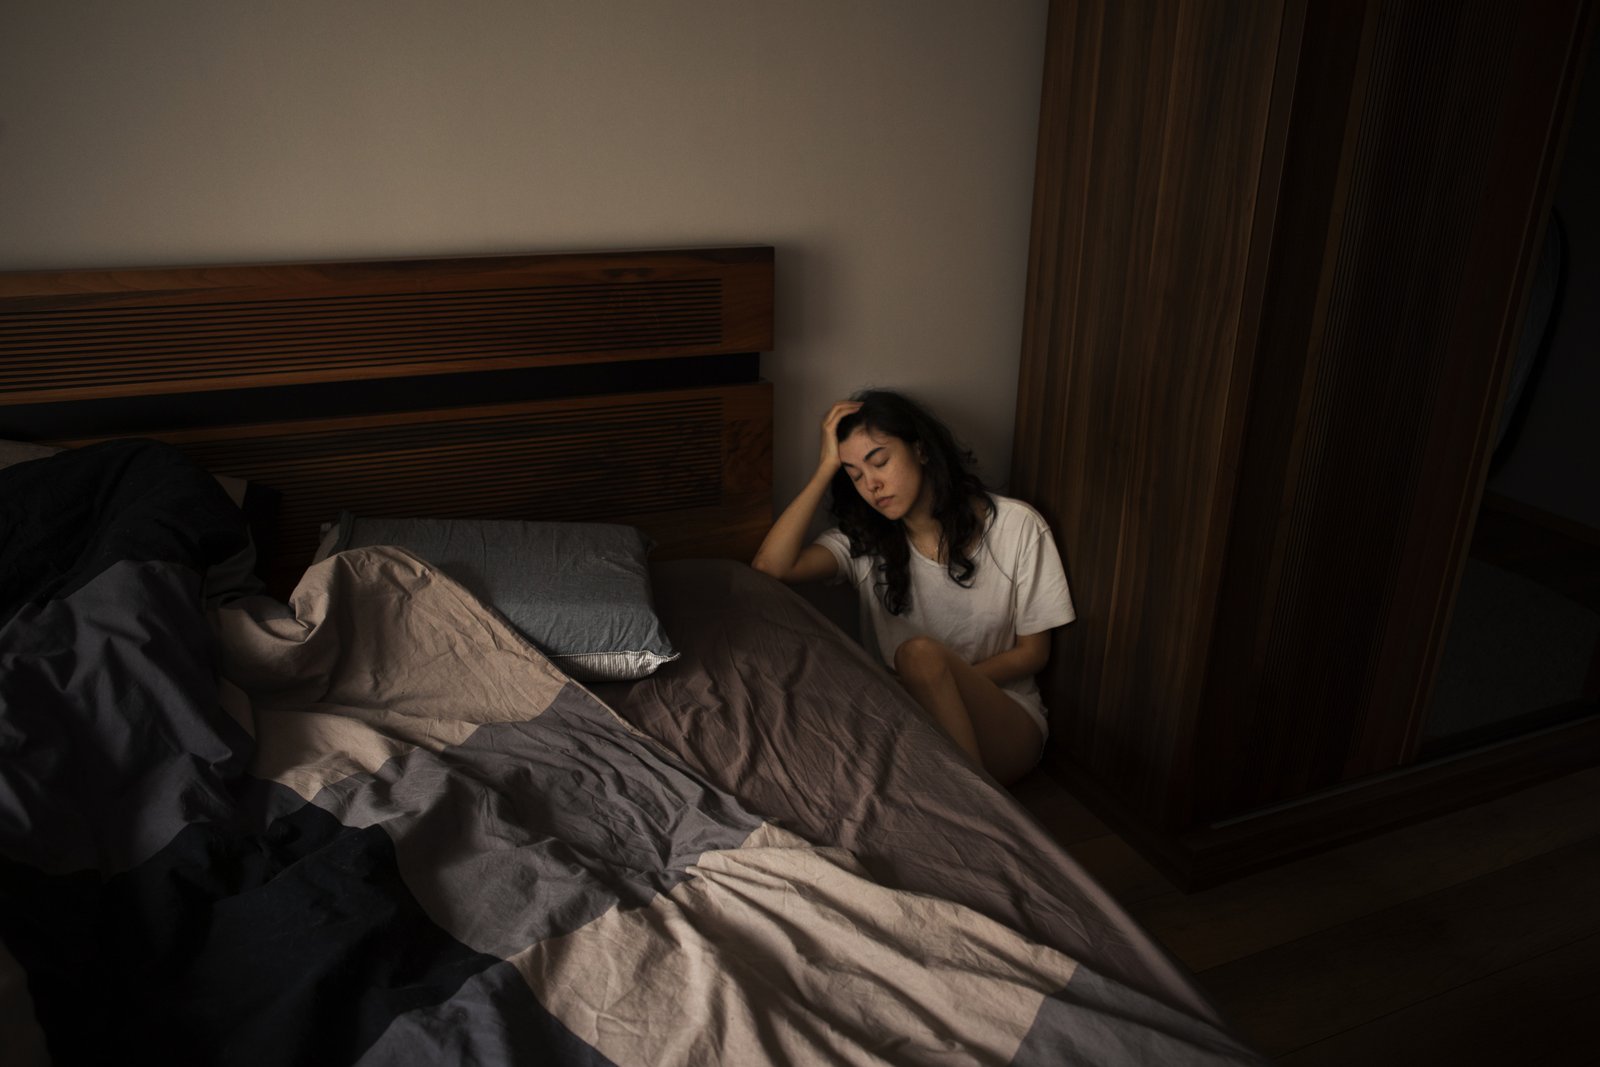 Suicide And Homicide Risks Peak At Night, Disrupted Sleep A Contributing Factor: Study